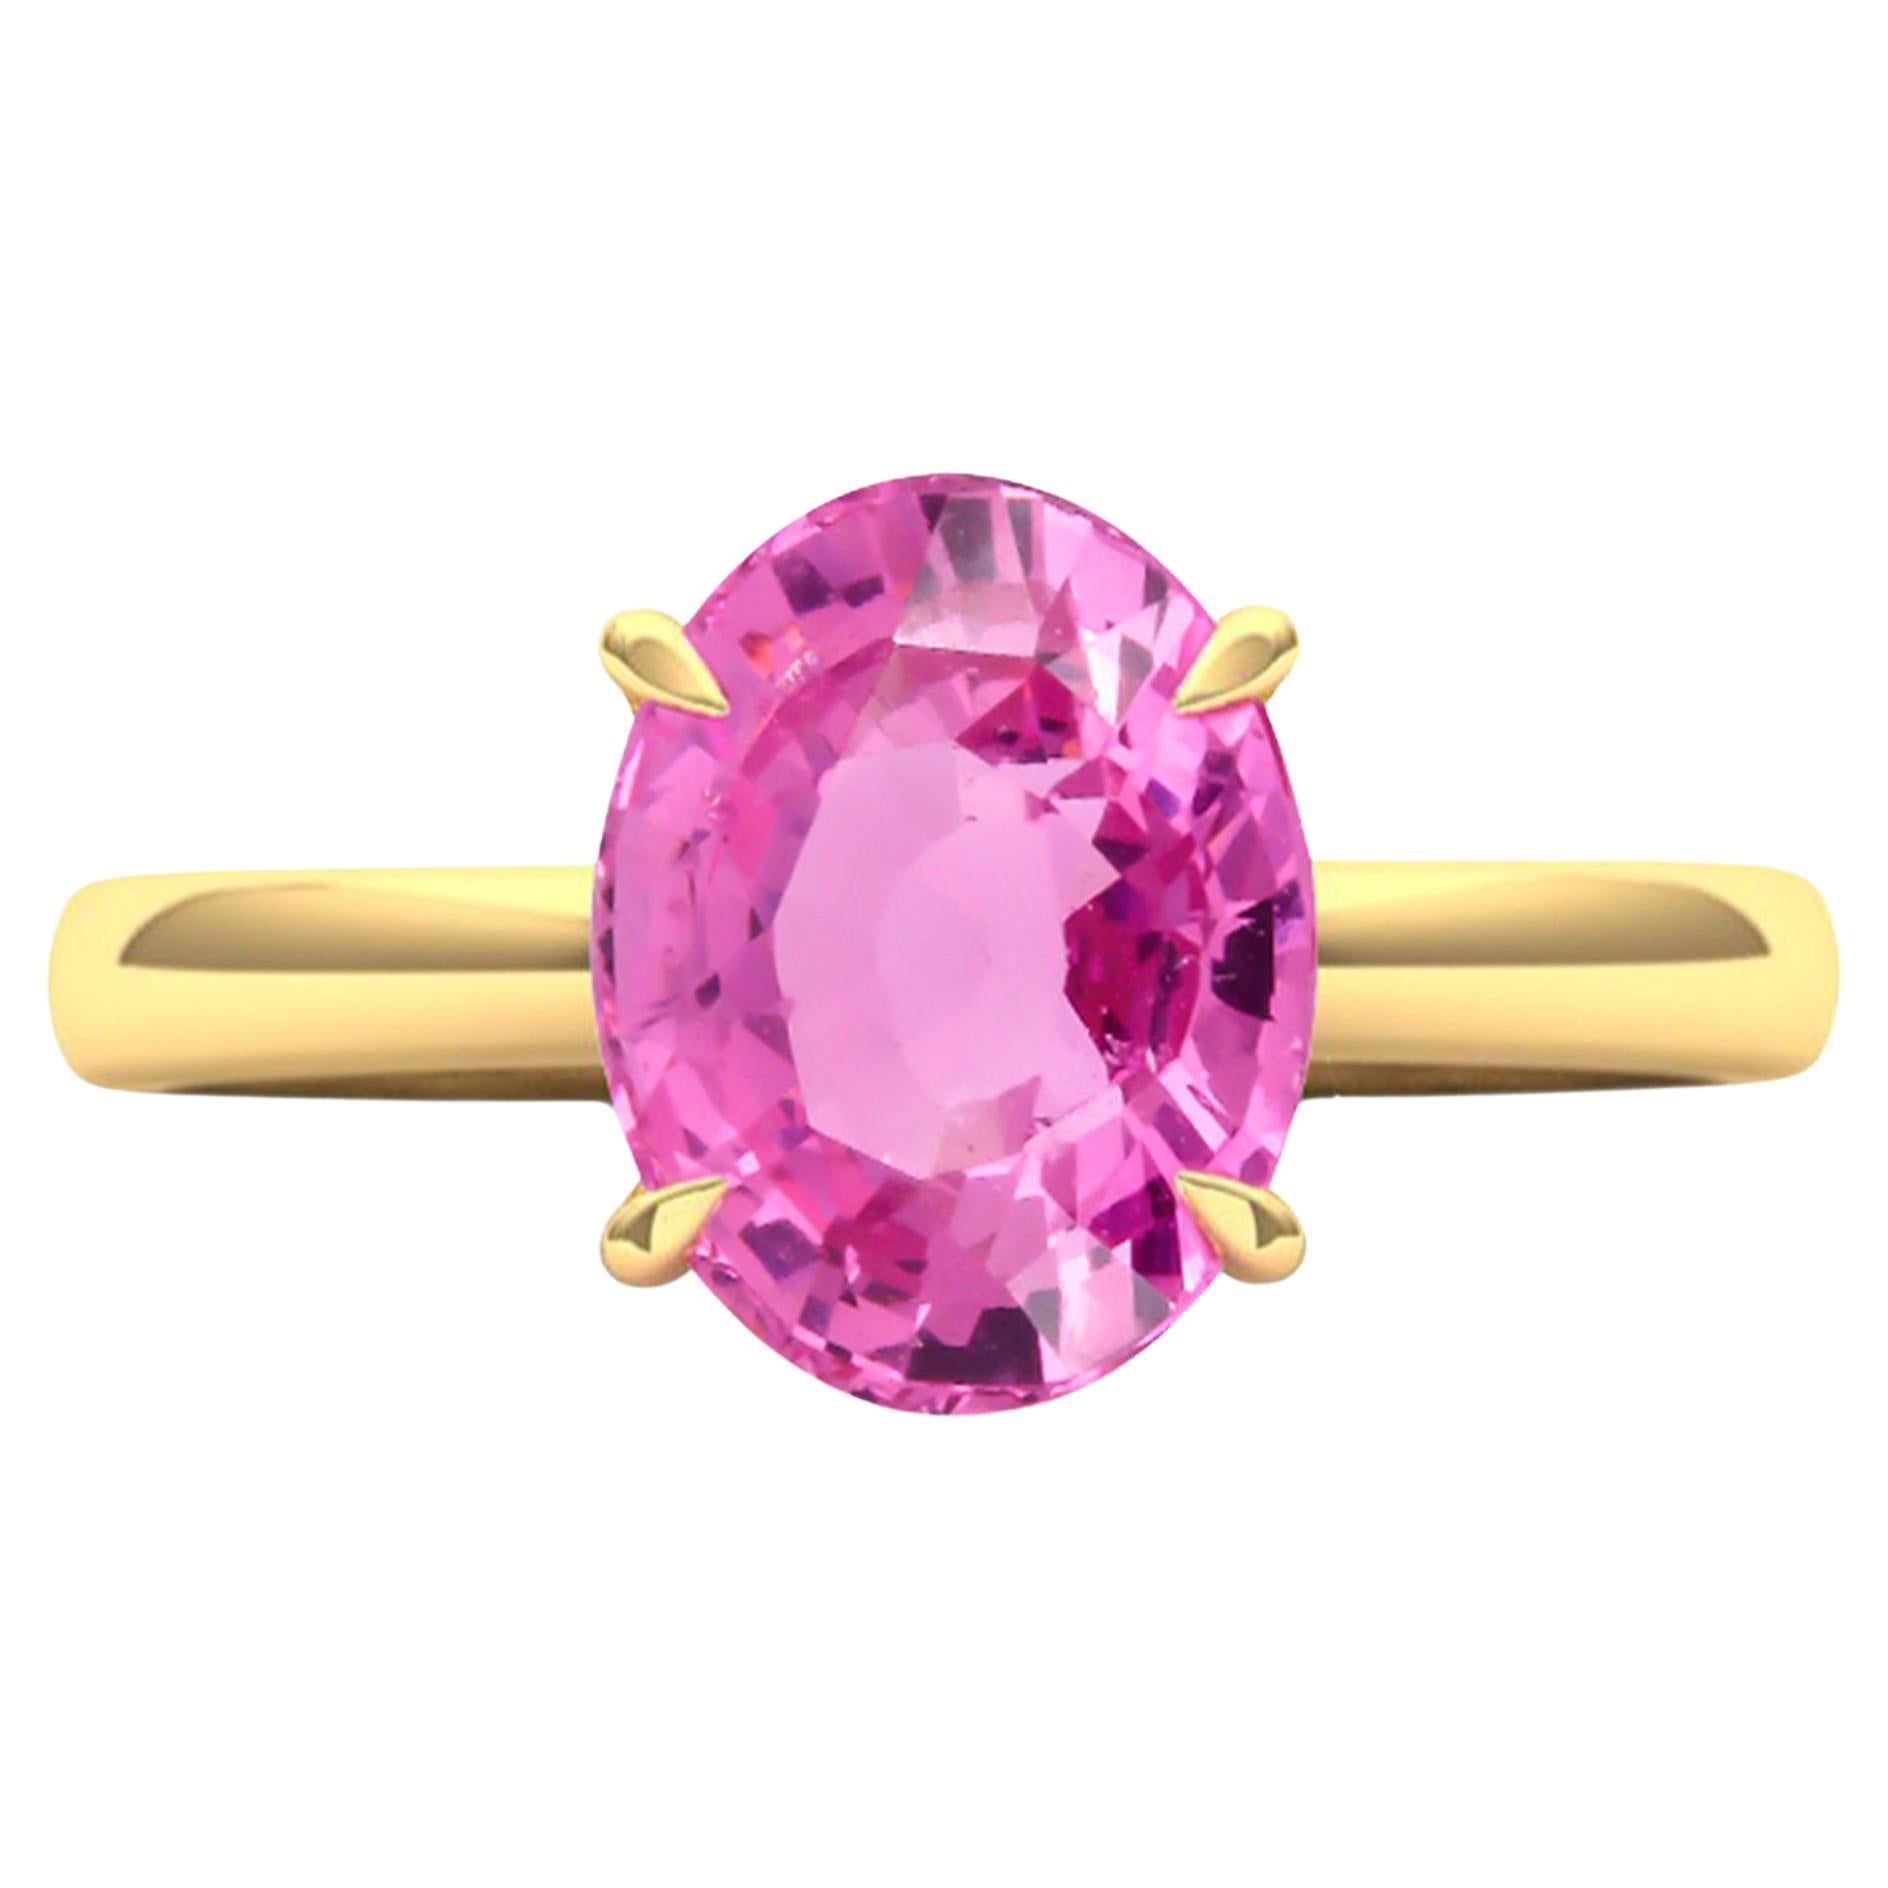 Berquin Certified 5.08 Carat Pink Spinel Cushion Gold Cocktail Ring For ...